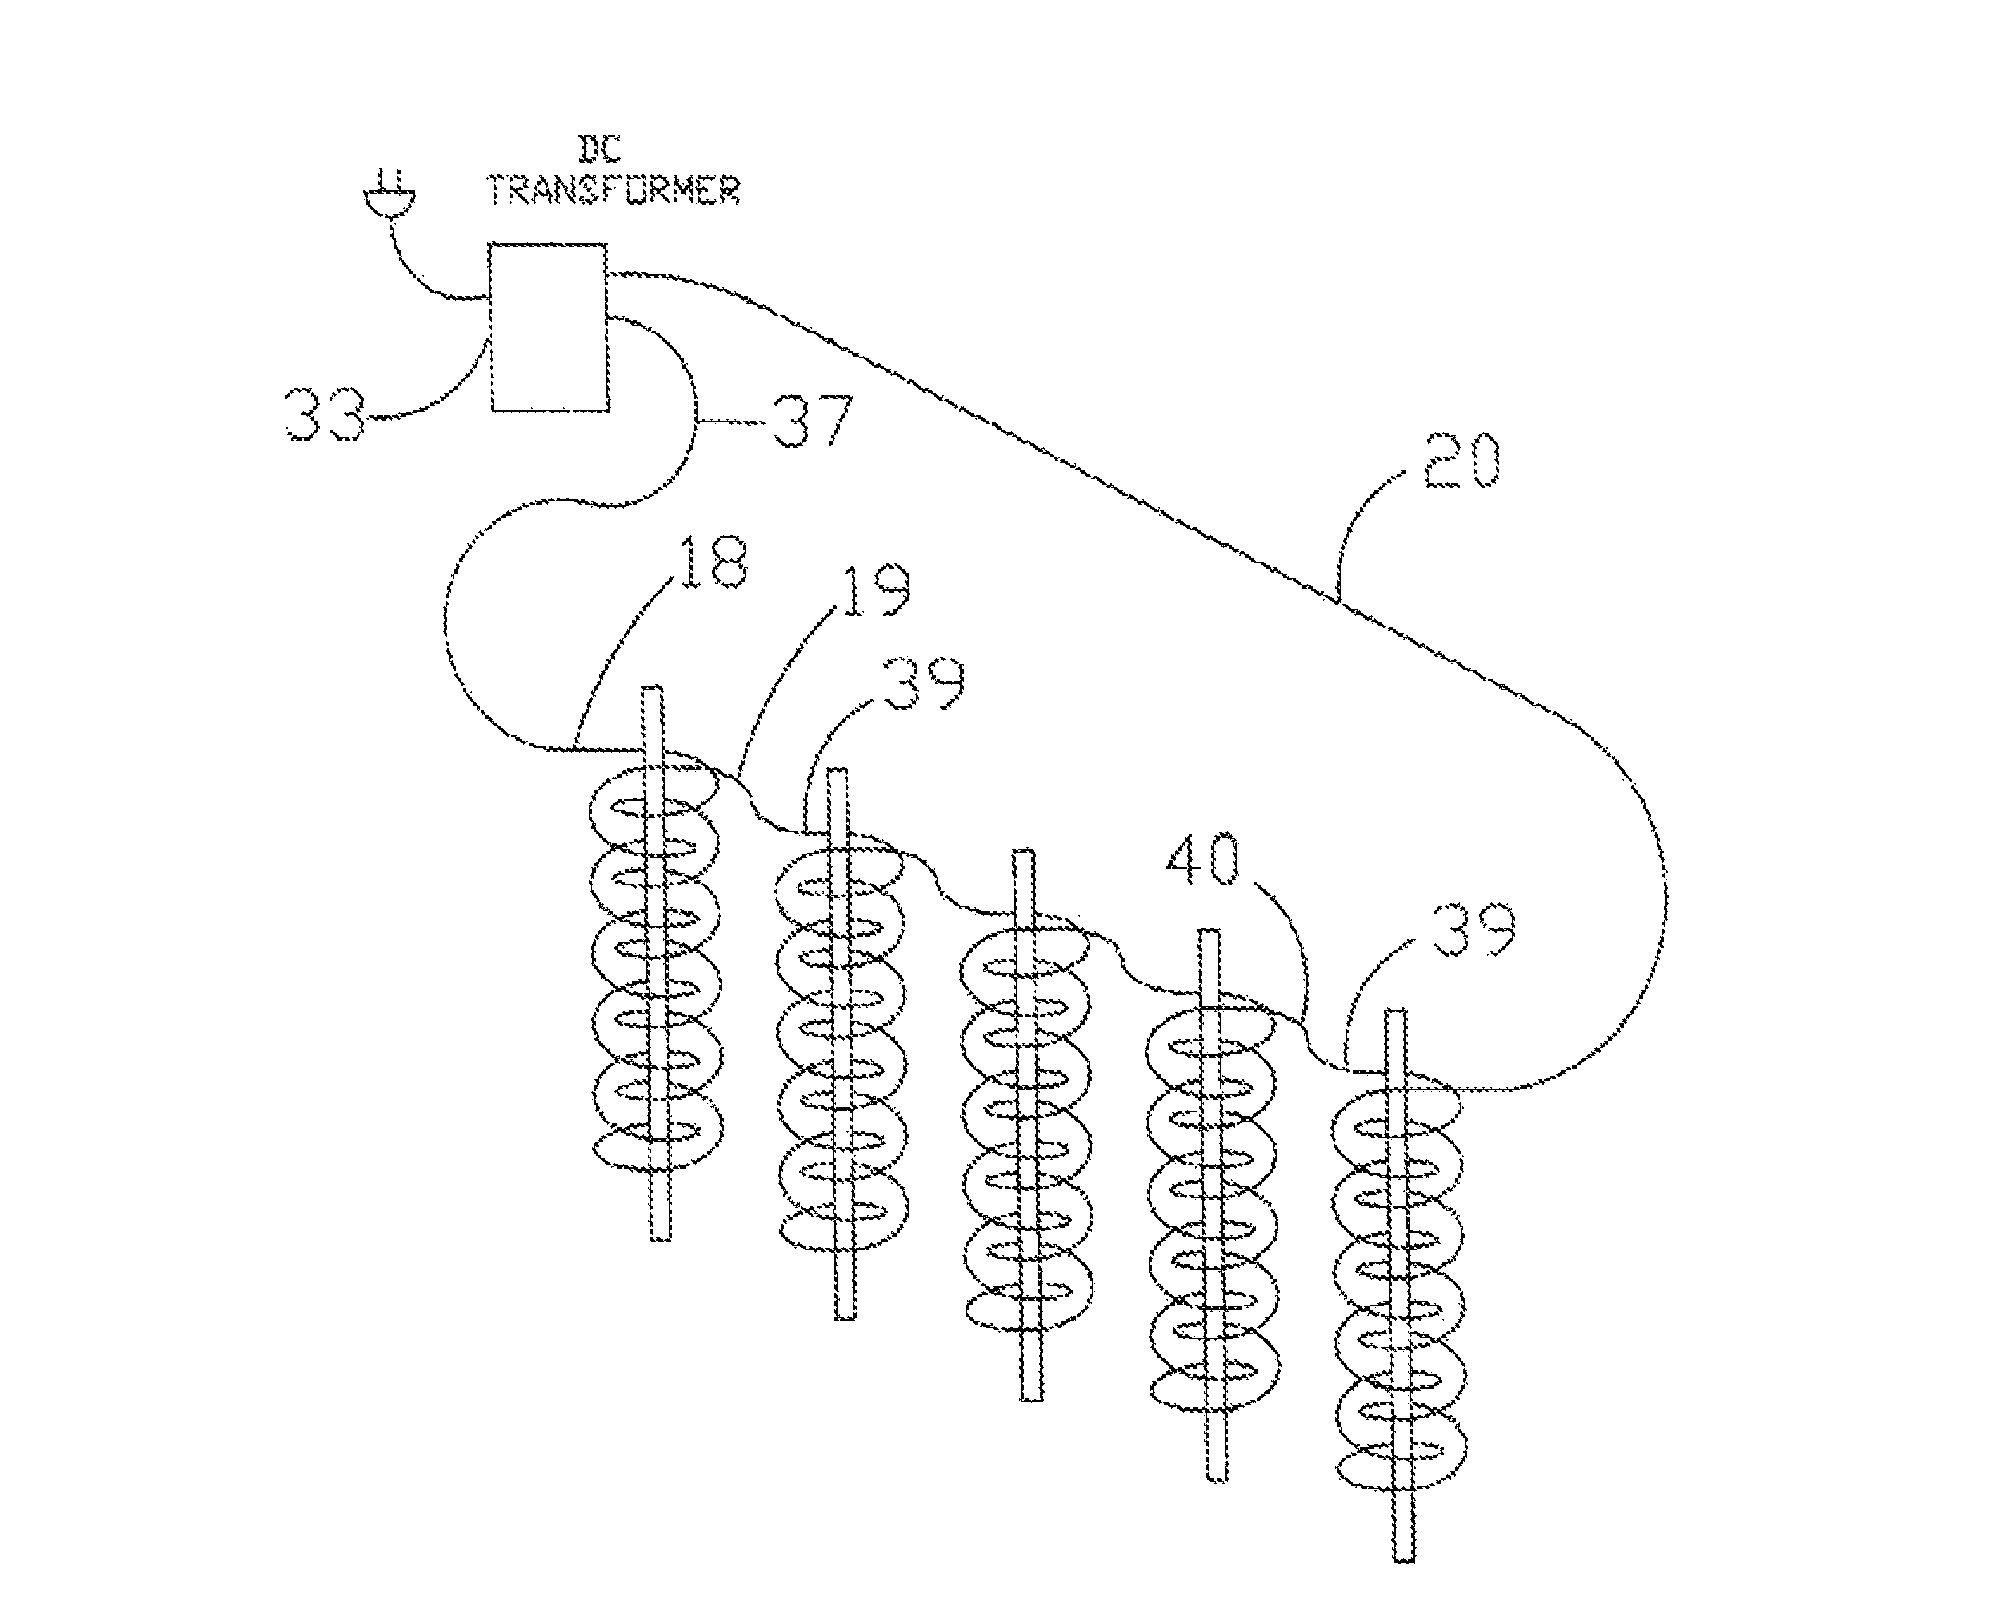 Apparatus for creating a vortex system